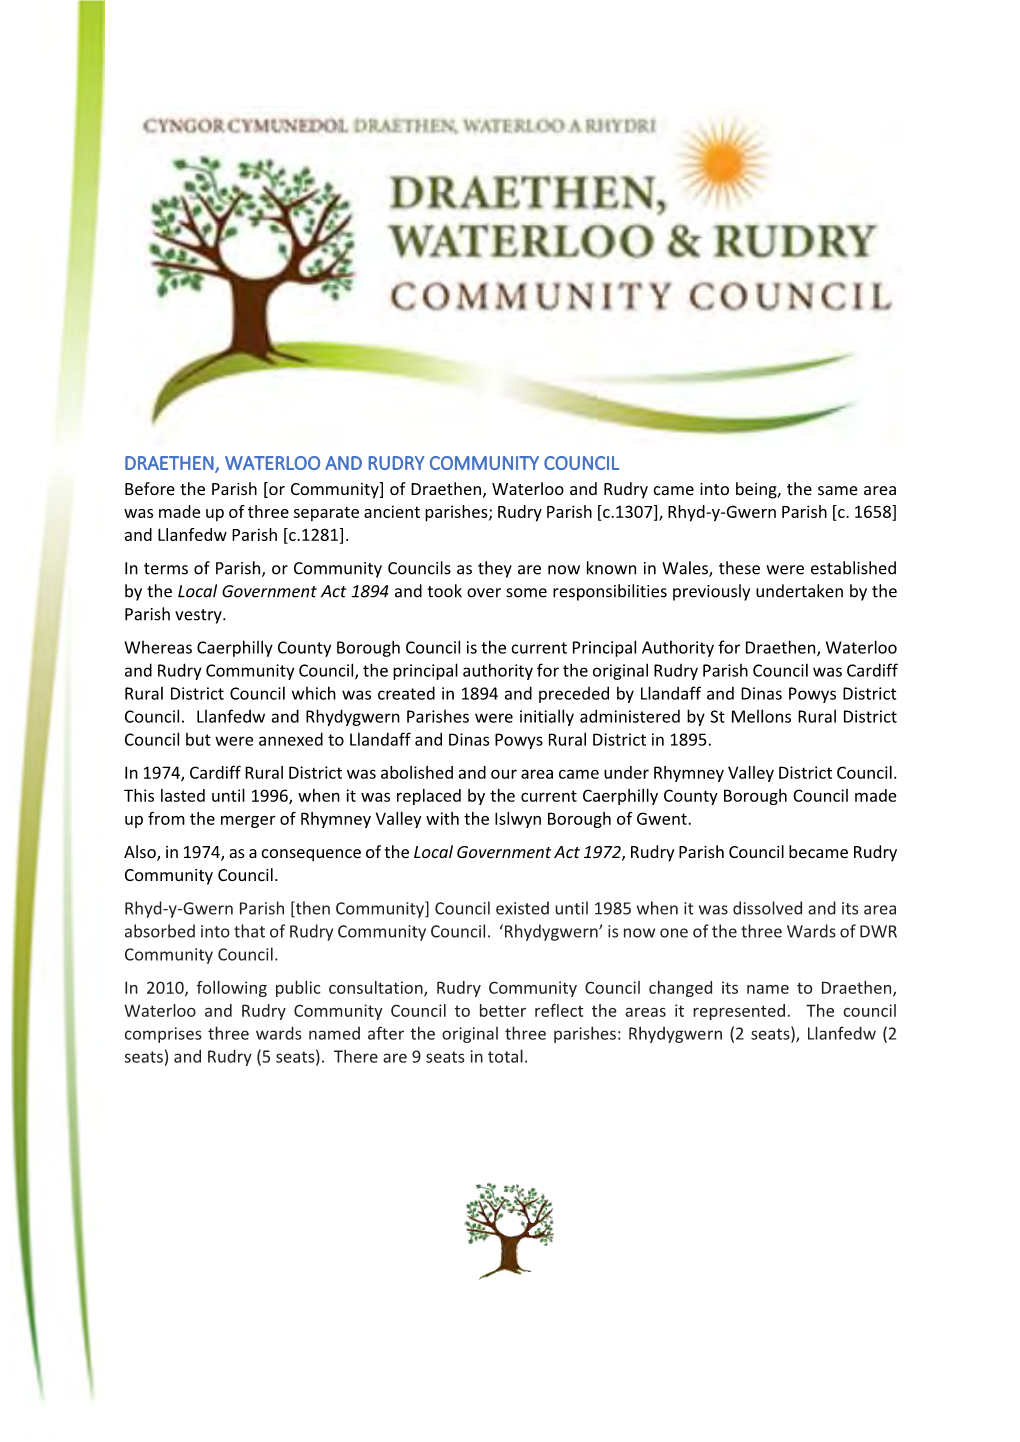 Draethen, Waterloo and Rudry Community Council